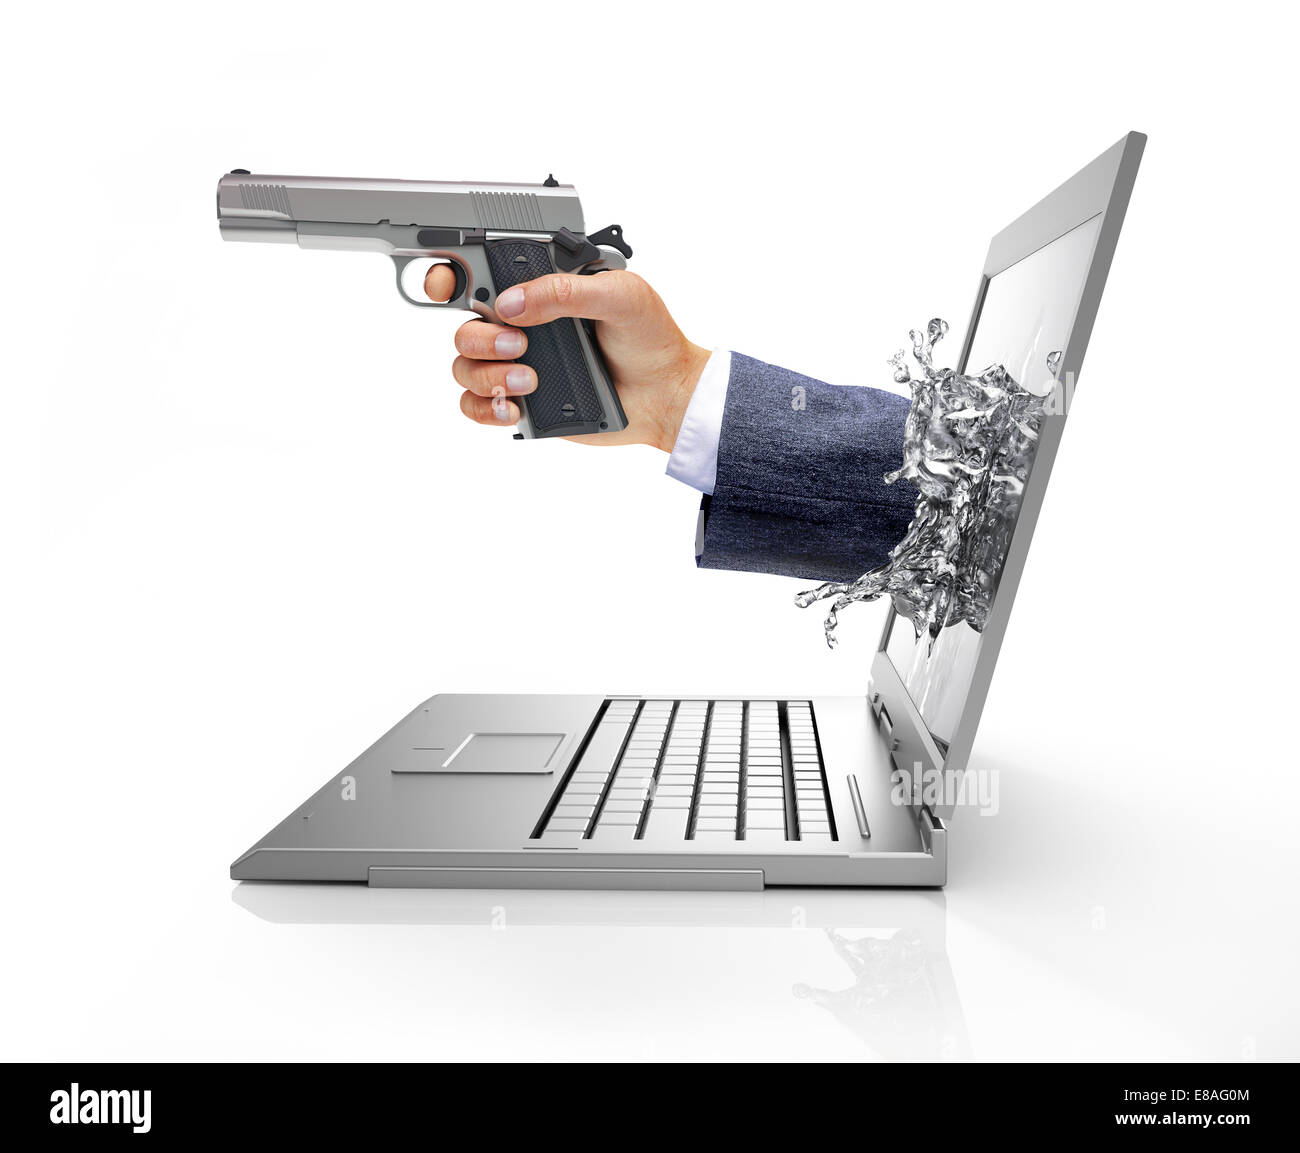 Man's hands, coming out from a computer laptop screen, forming a splash from liquid crystals, holding a silver gun. Viewed from Stock Photo